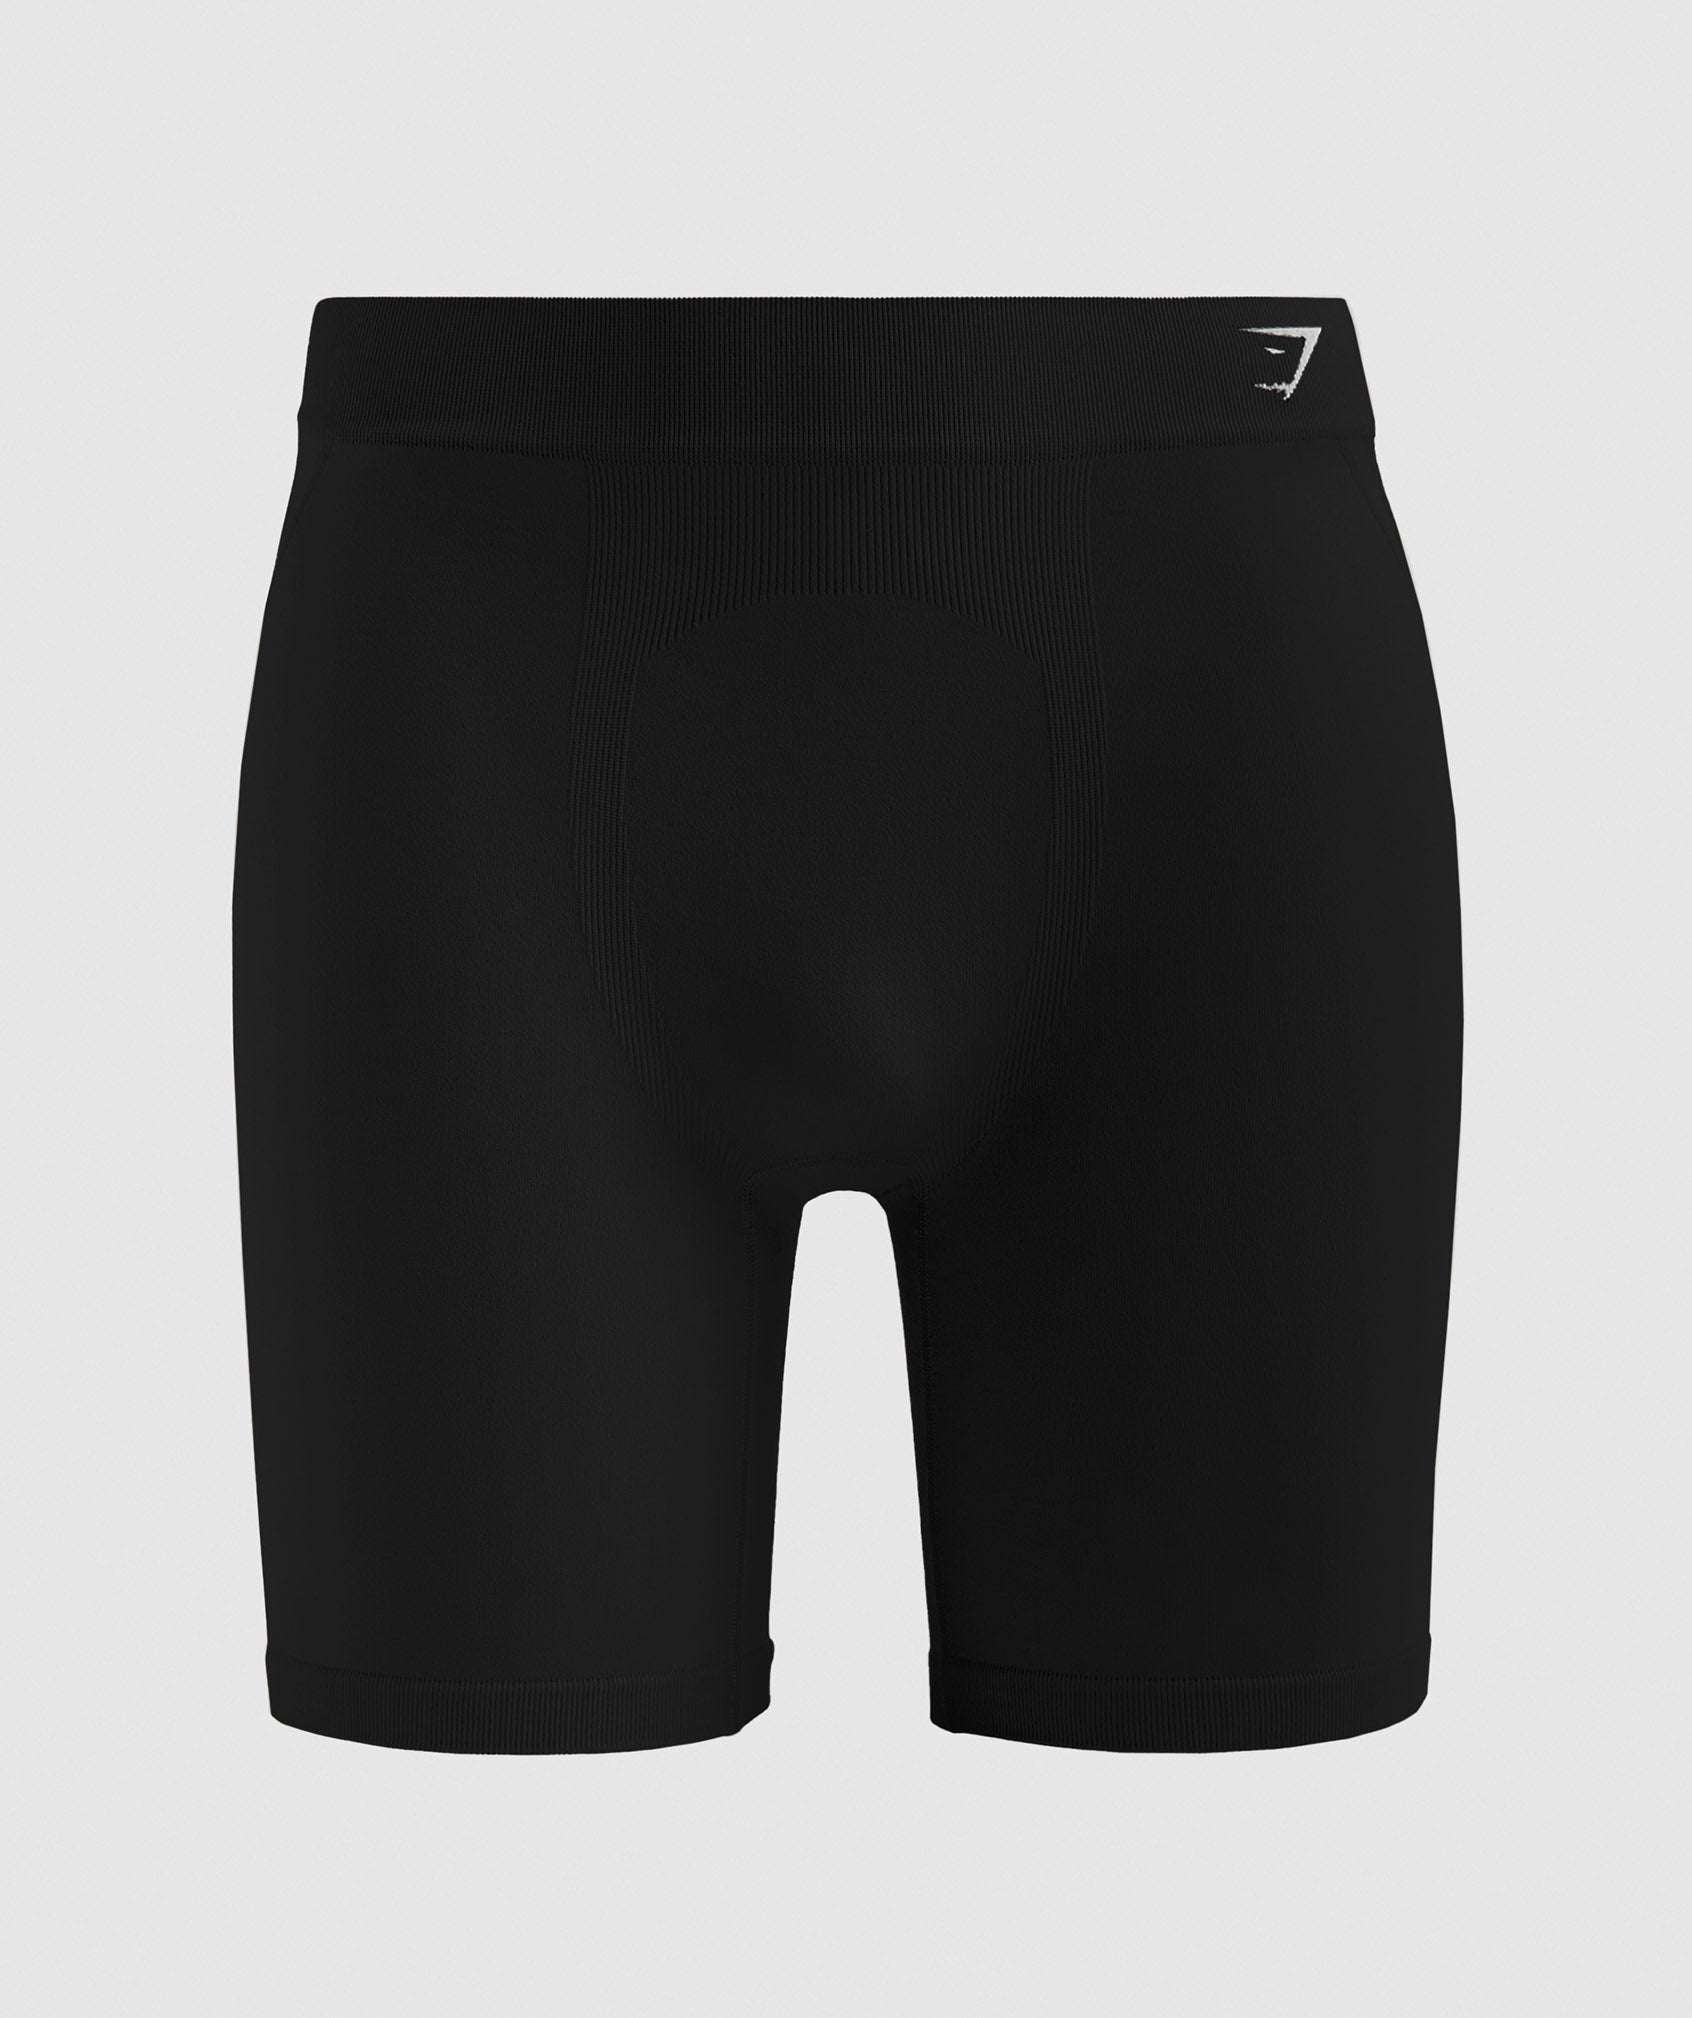 Hybrid Boxer in Black/Light Grey is out of stock